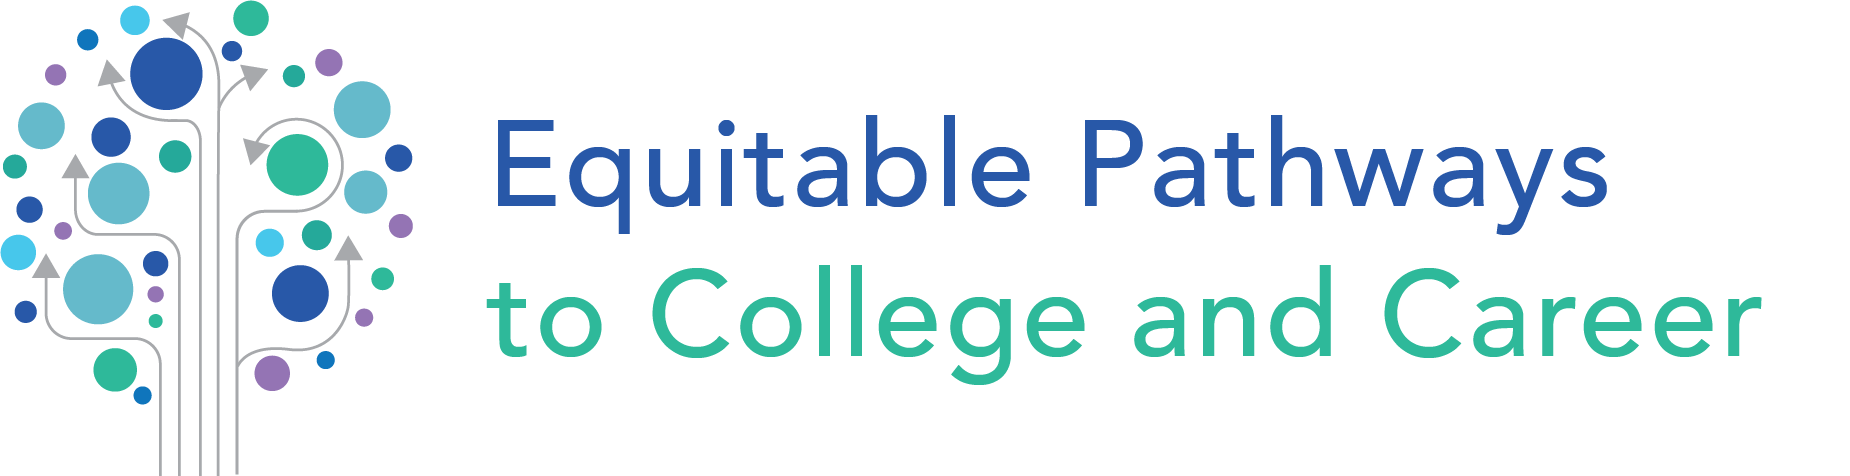 Equitable Pathways to College and Careers logo